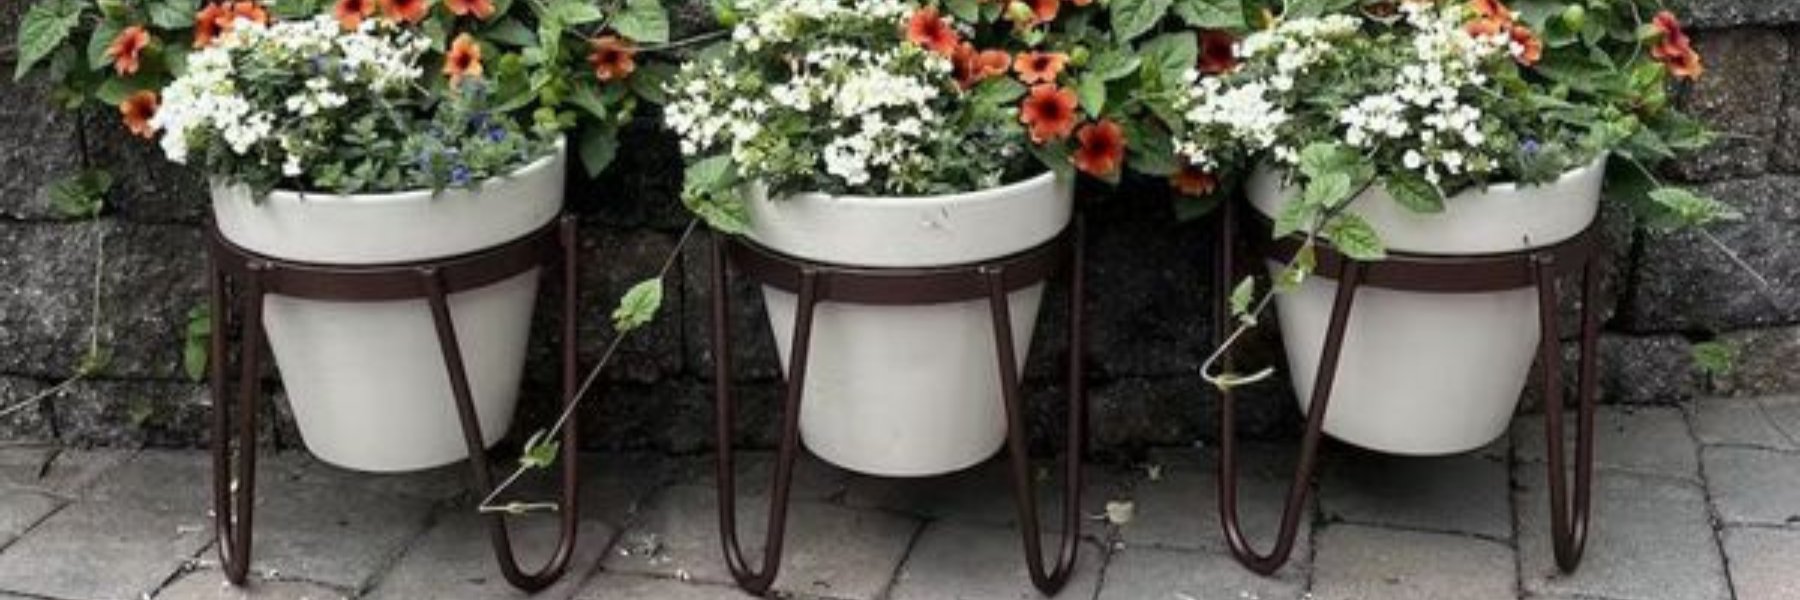 The Outdoors Collection - Indoor & Outdoor Planters